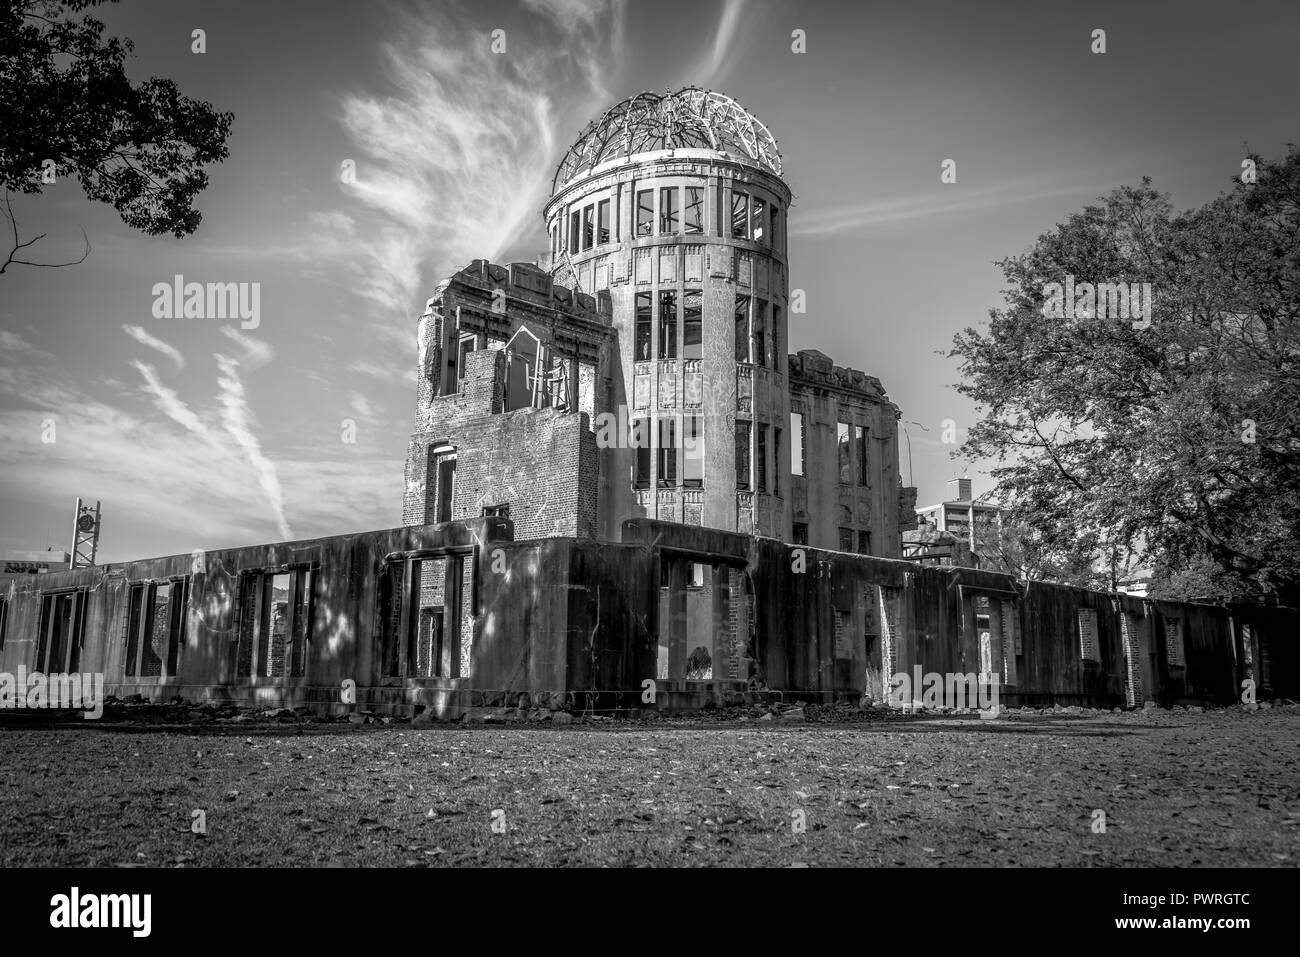 A Bomb Dome in Hiroshima. A UNESCO world heritage site in Japan - Hiroshima Prefecture. Stock Photo